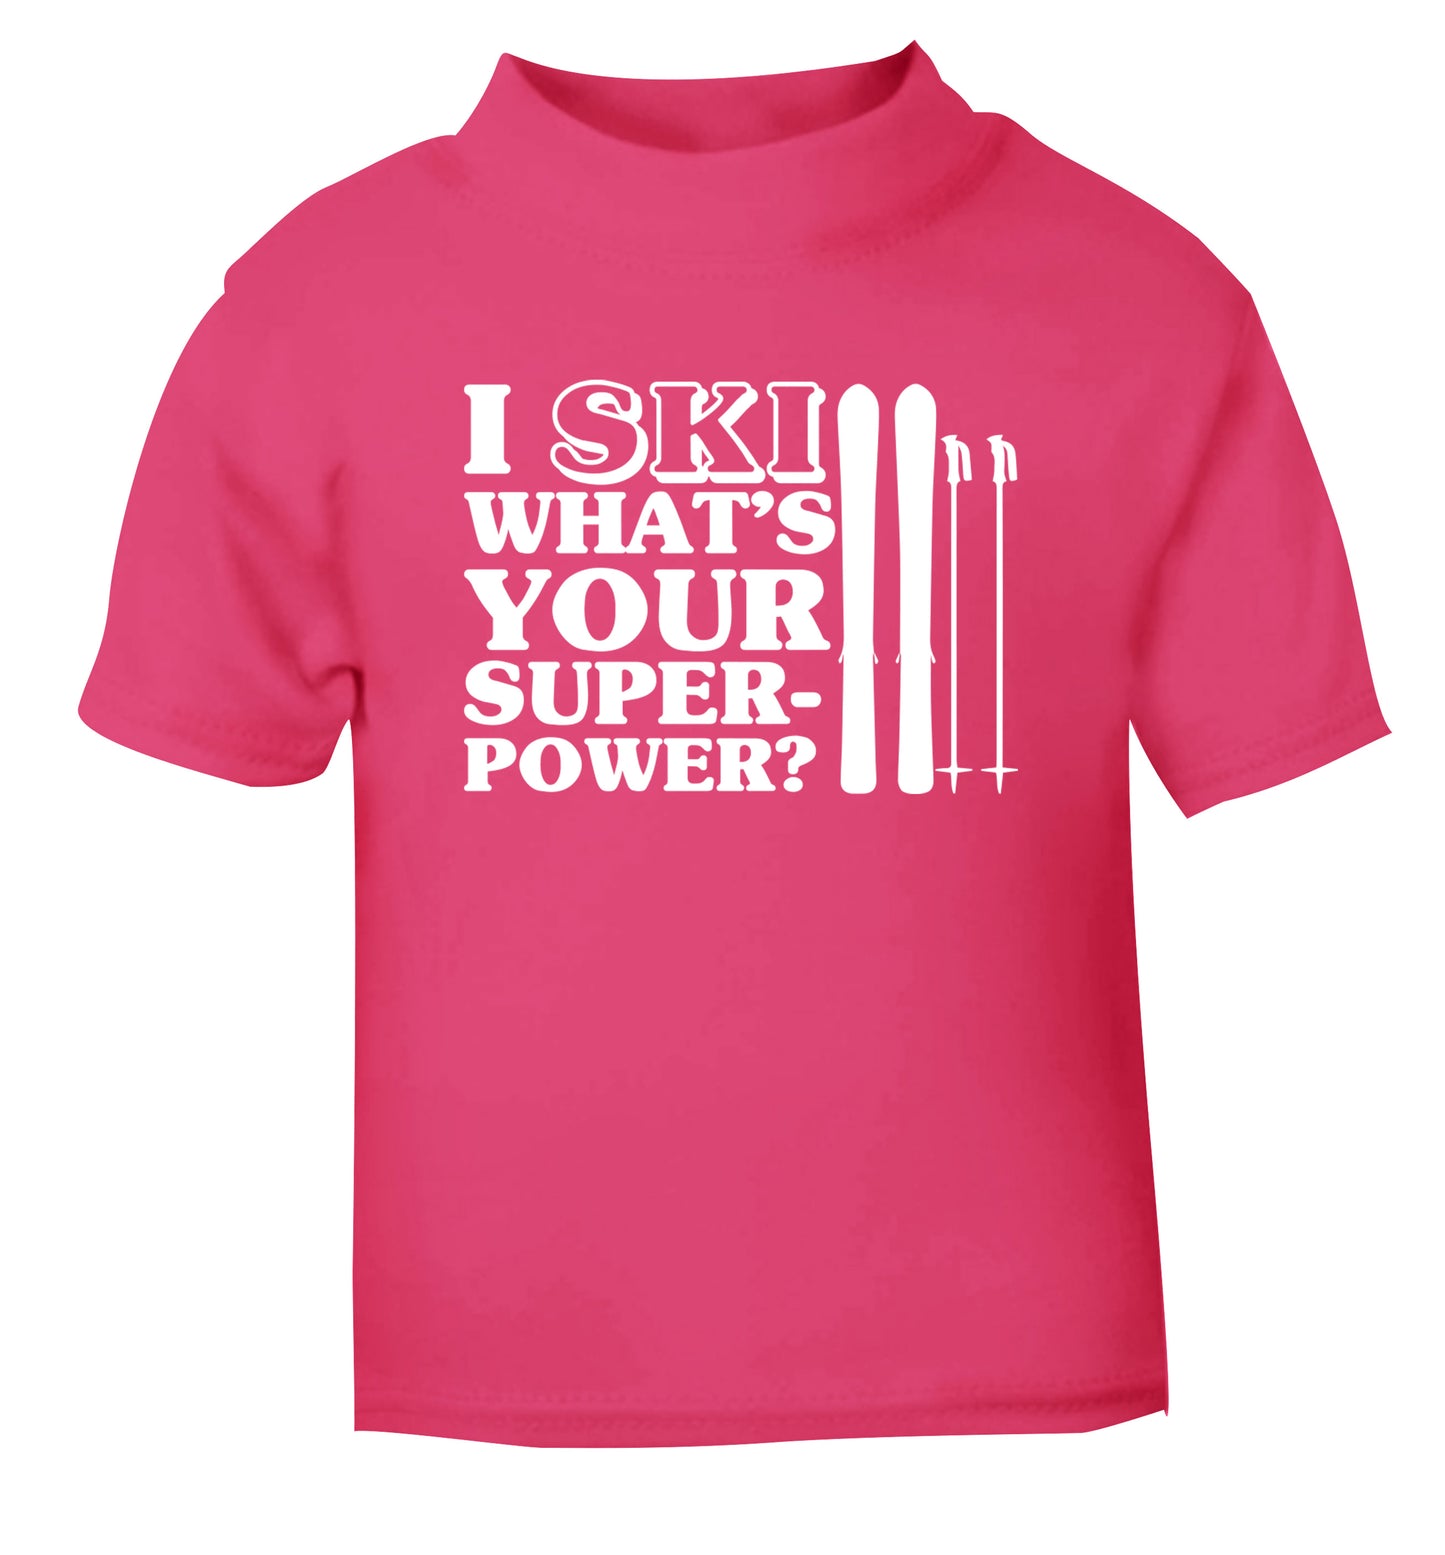 I ski what's your superpower? pink Baby Toddler Tshirt 2 Years